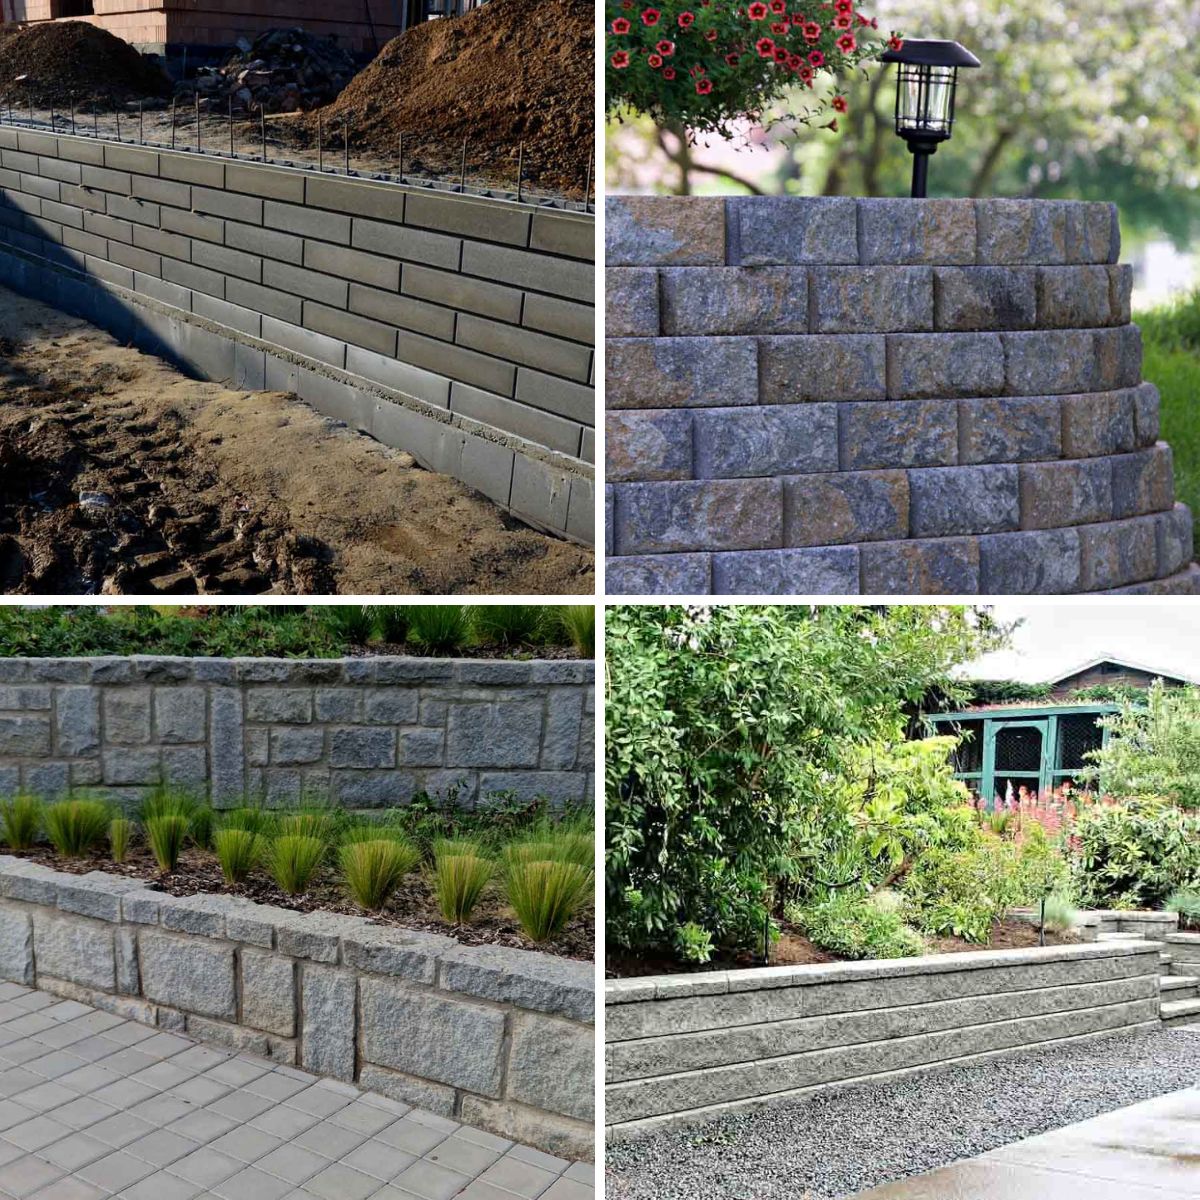 different retaining wall designs made of concrete block